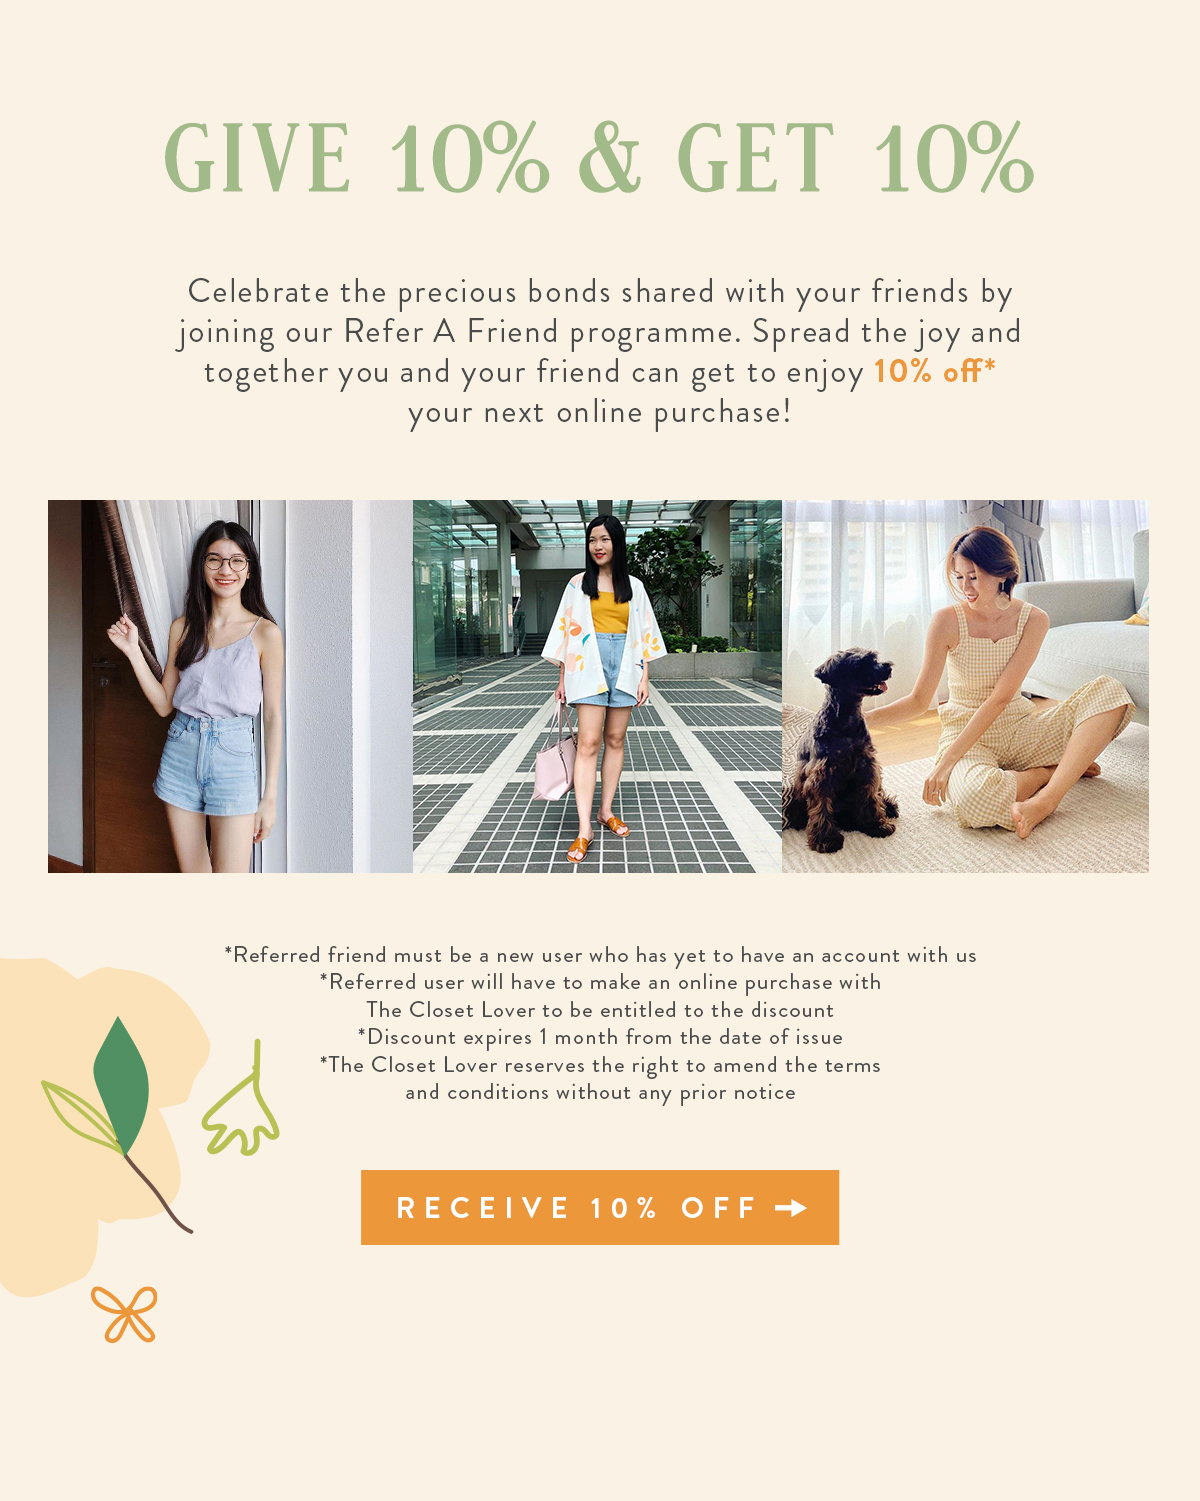 Give 10% And Get 10%